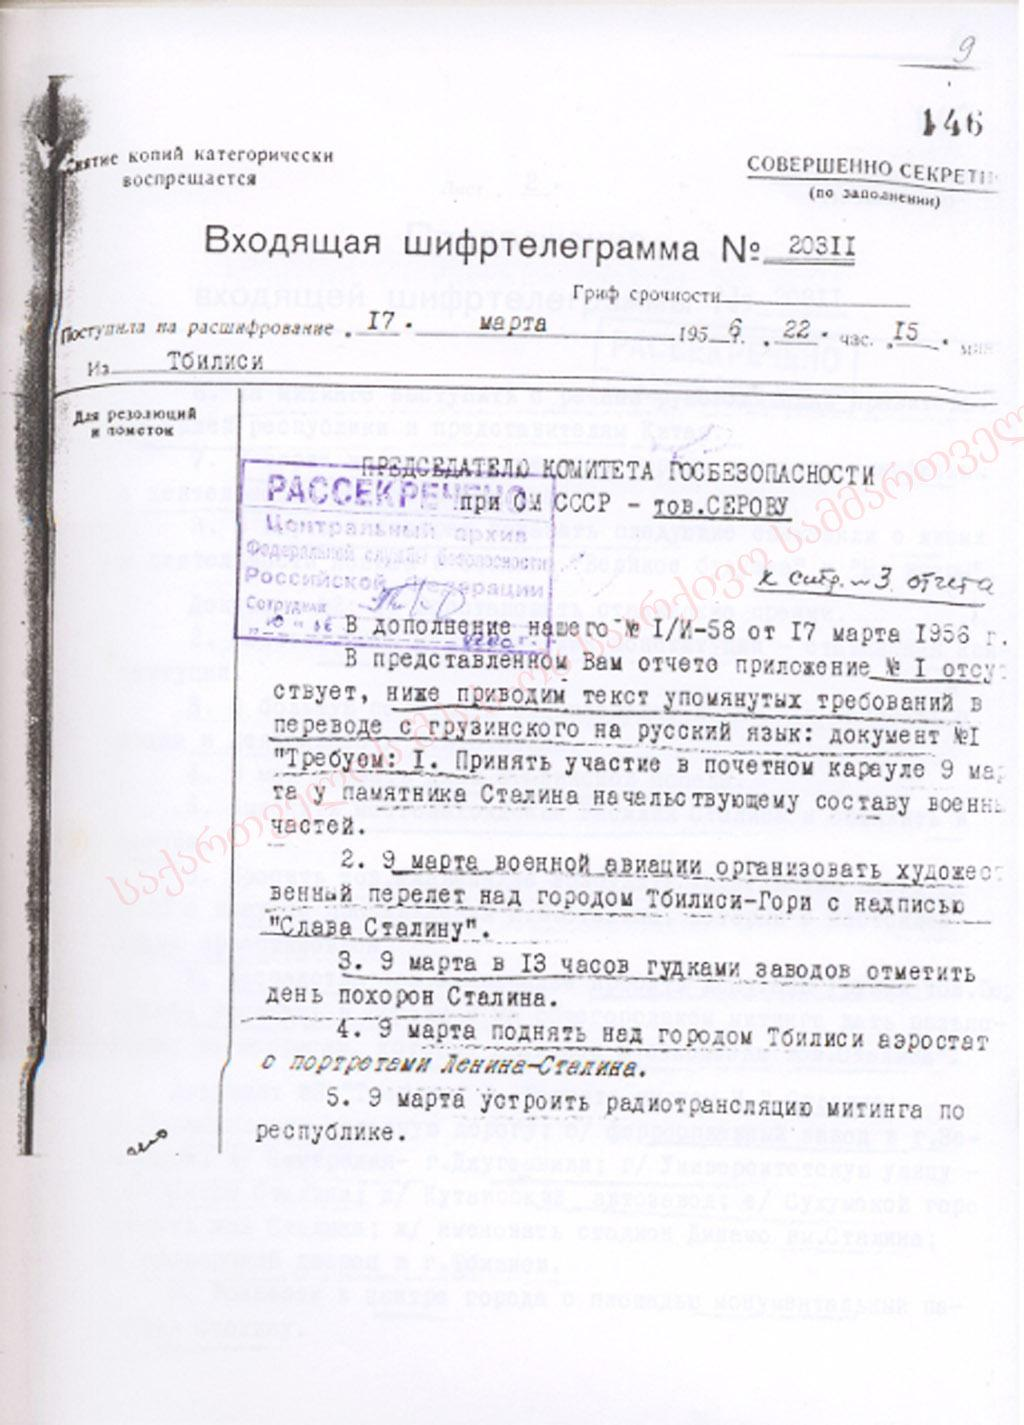 The secret cipher telegram from the General-Mayor Shvirkov, Deputy Chairman of the Committee for State Security (KGB) at the Council of Ministers of the Georgian SSR, to the Chairman of the Committee for State Security (KGB)of the USSR, Army General I. Serov. № 20311